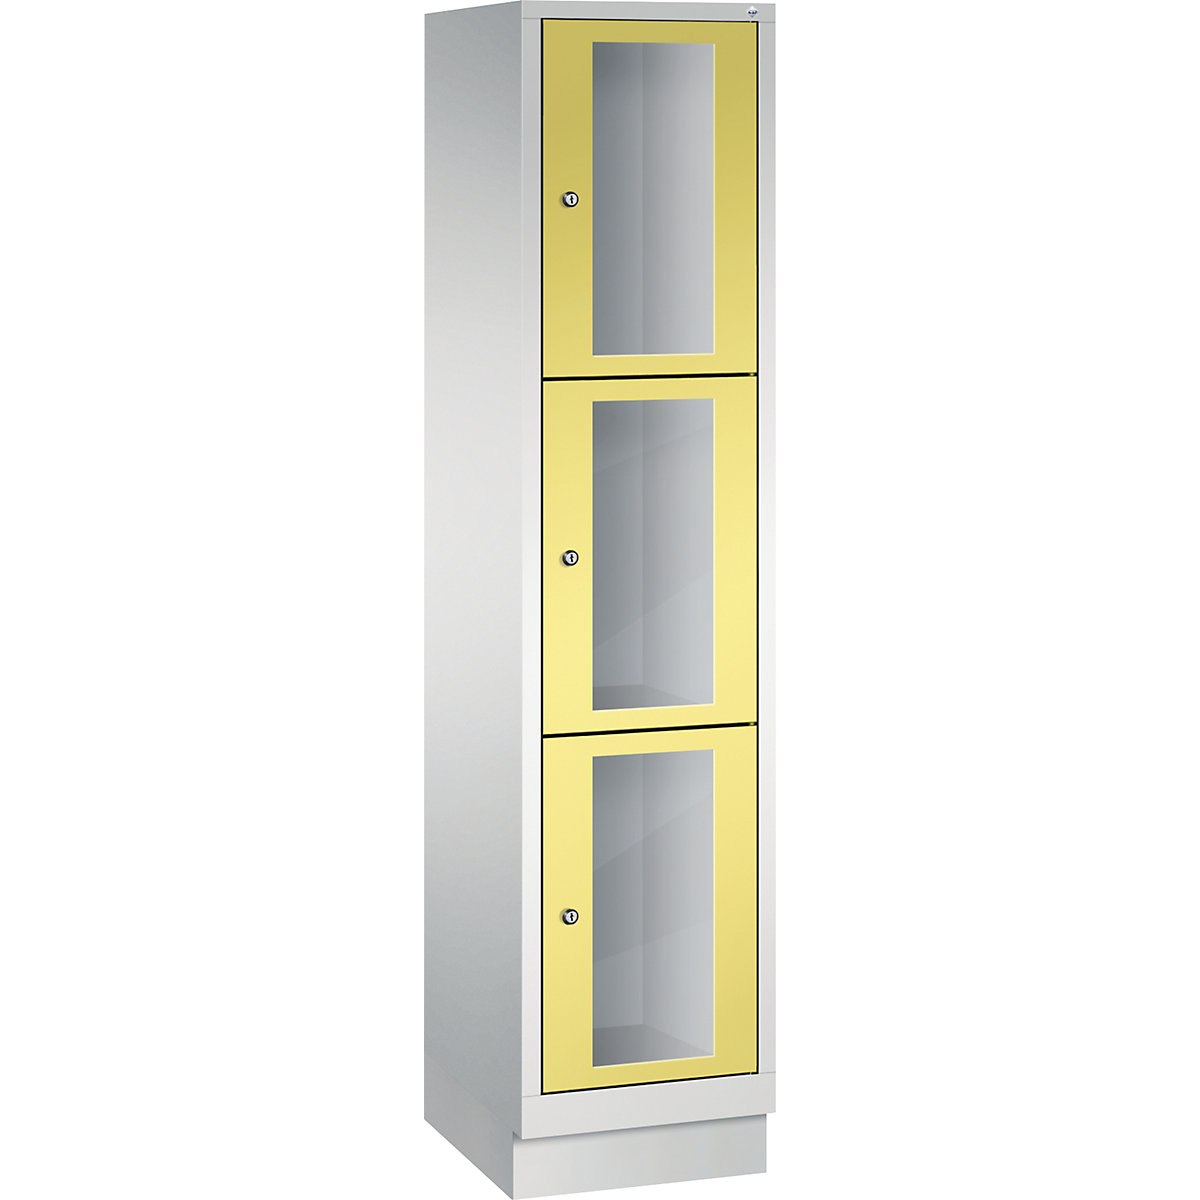 C+P – CLASSIC locker unit, compartment height 510 mm, with plinth, 3 compartments, width 420 mm, sulphur yellow door